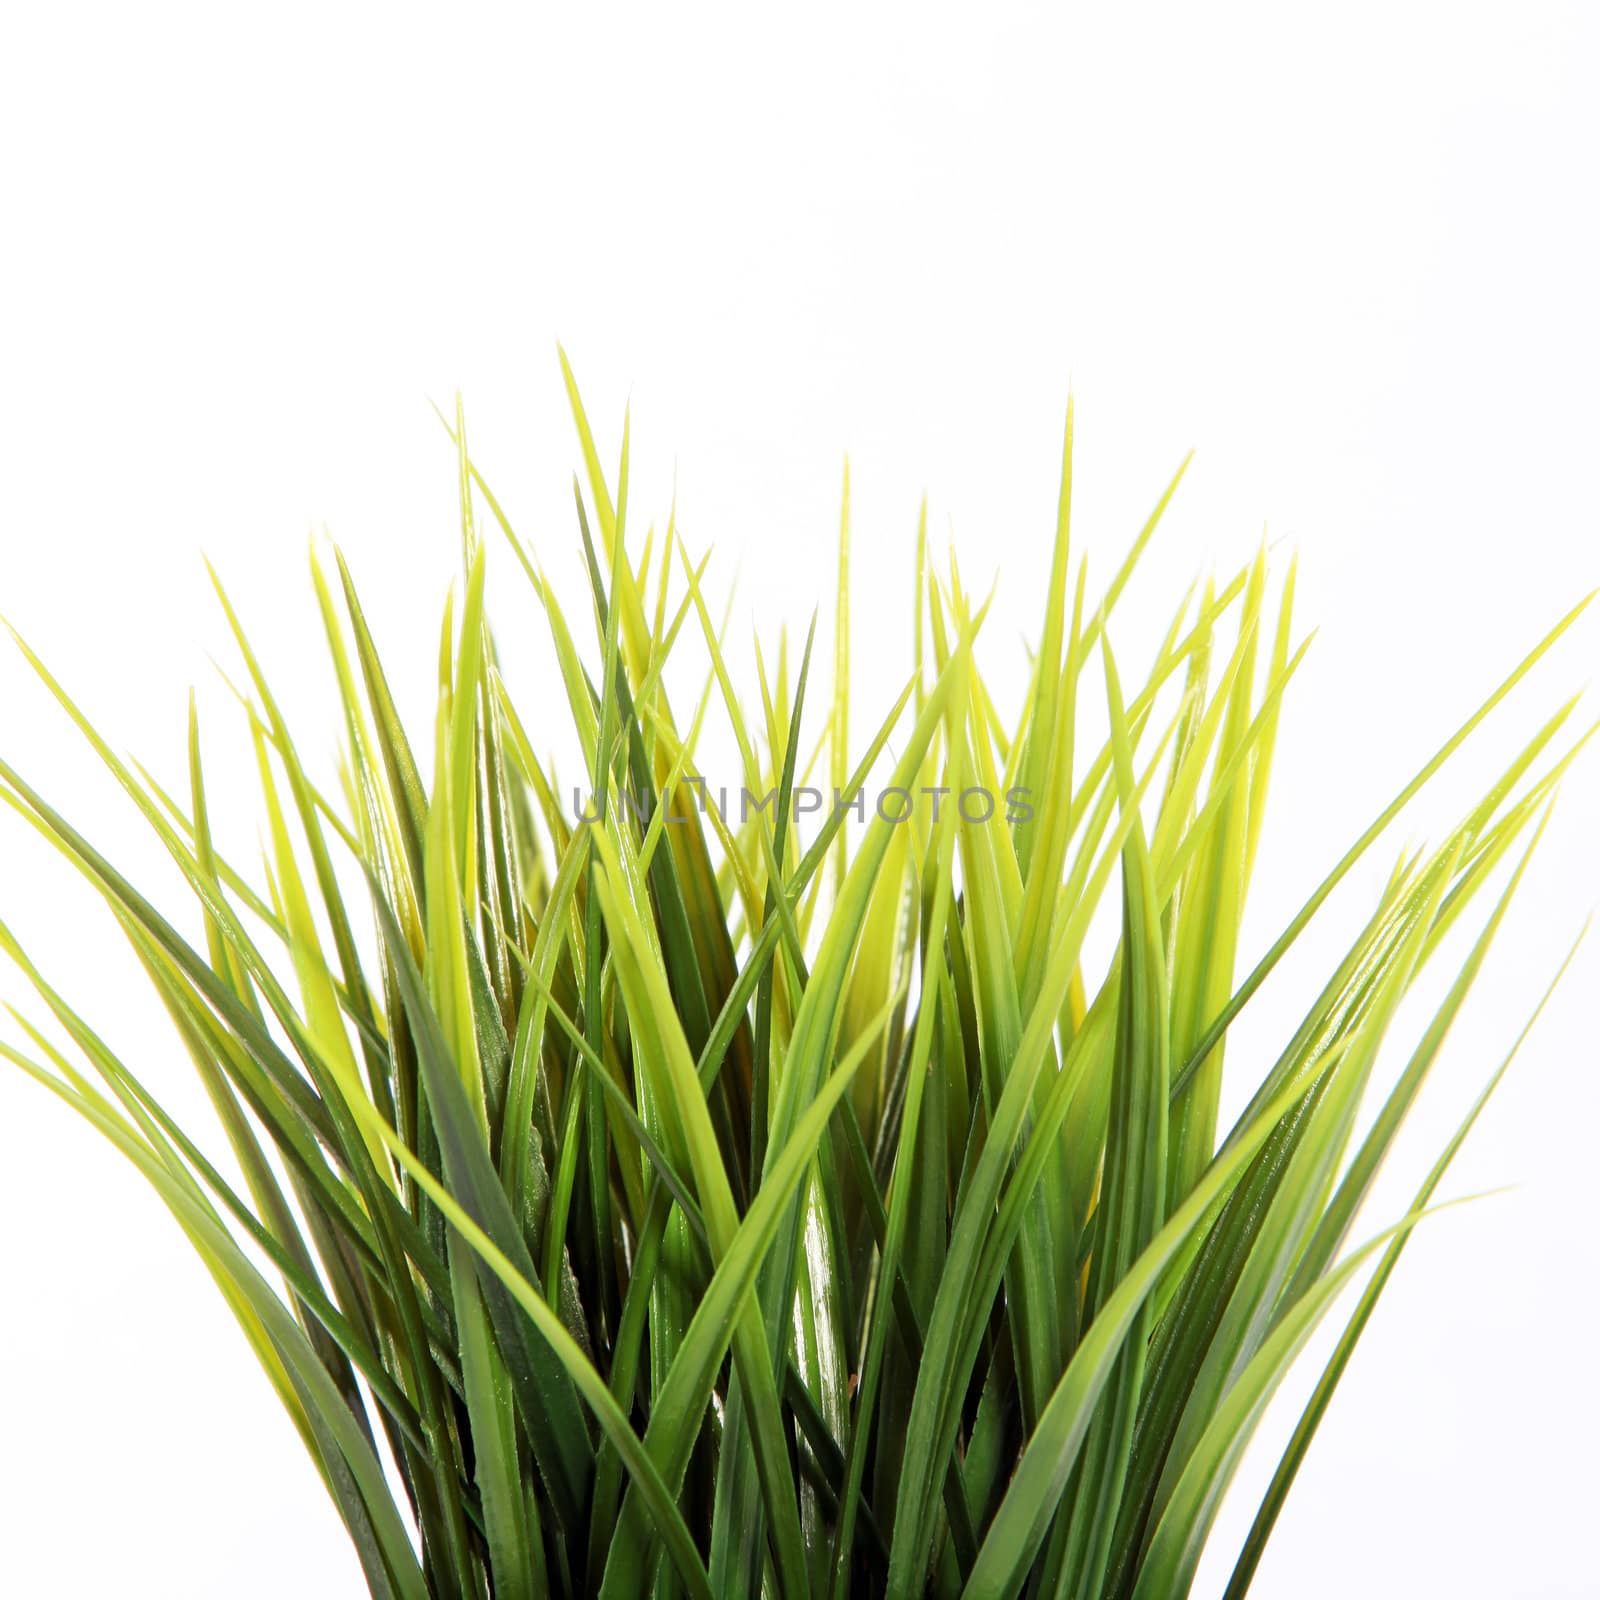 Leaves or blades of fresh green spring grass growing in an unseen container isolated on white